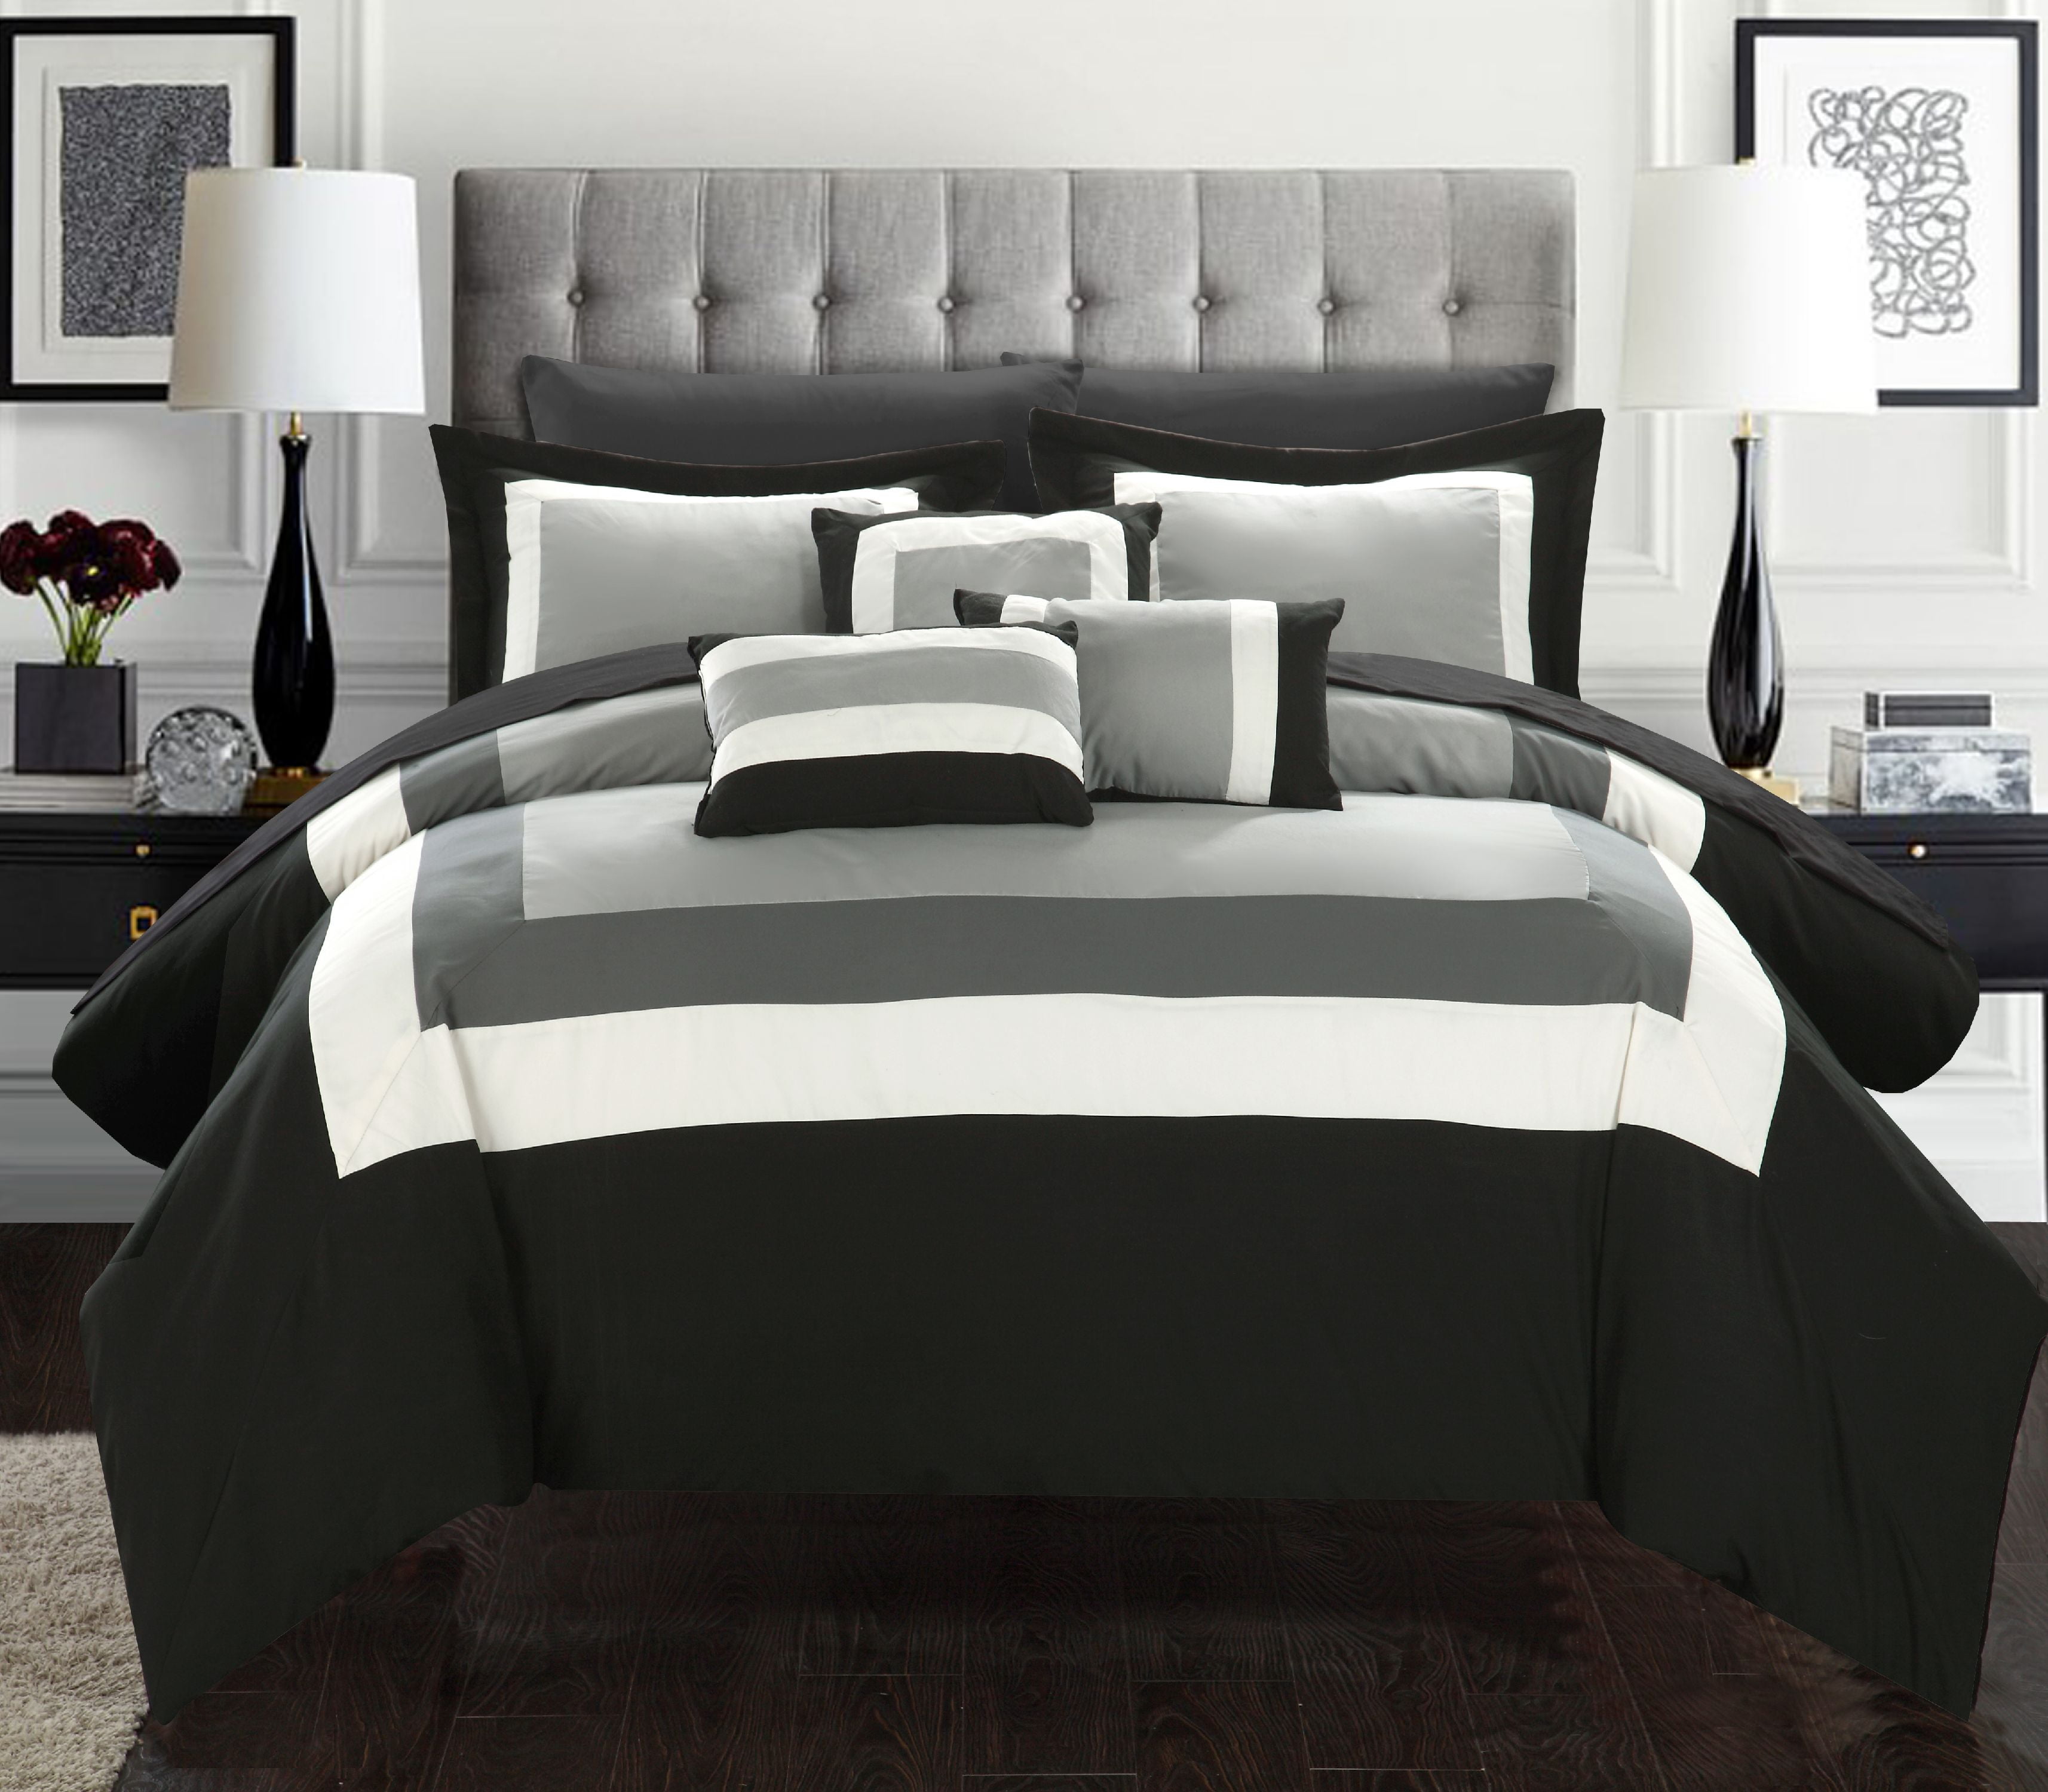 Details about   Beautiful Grey Black Border Striped Comforter & Sheets King or Queen 10 pcs Set 